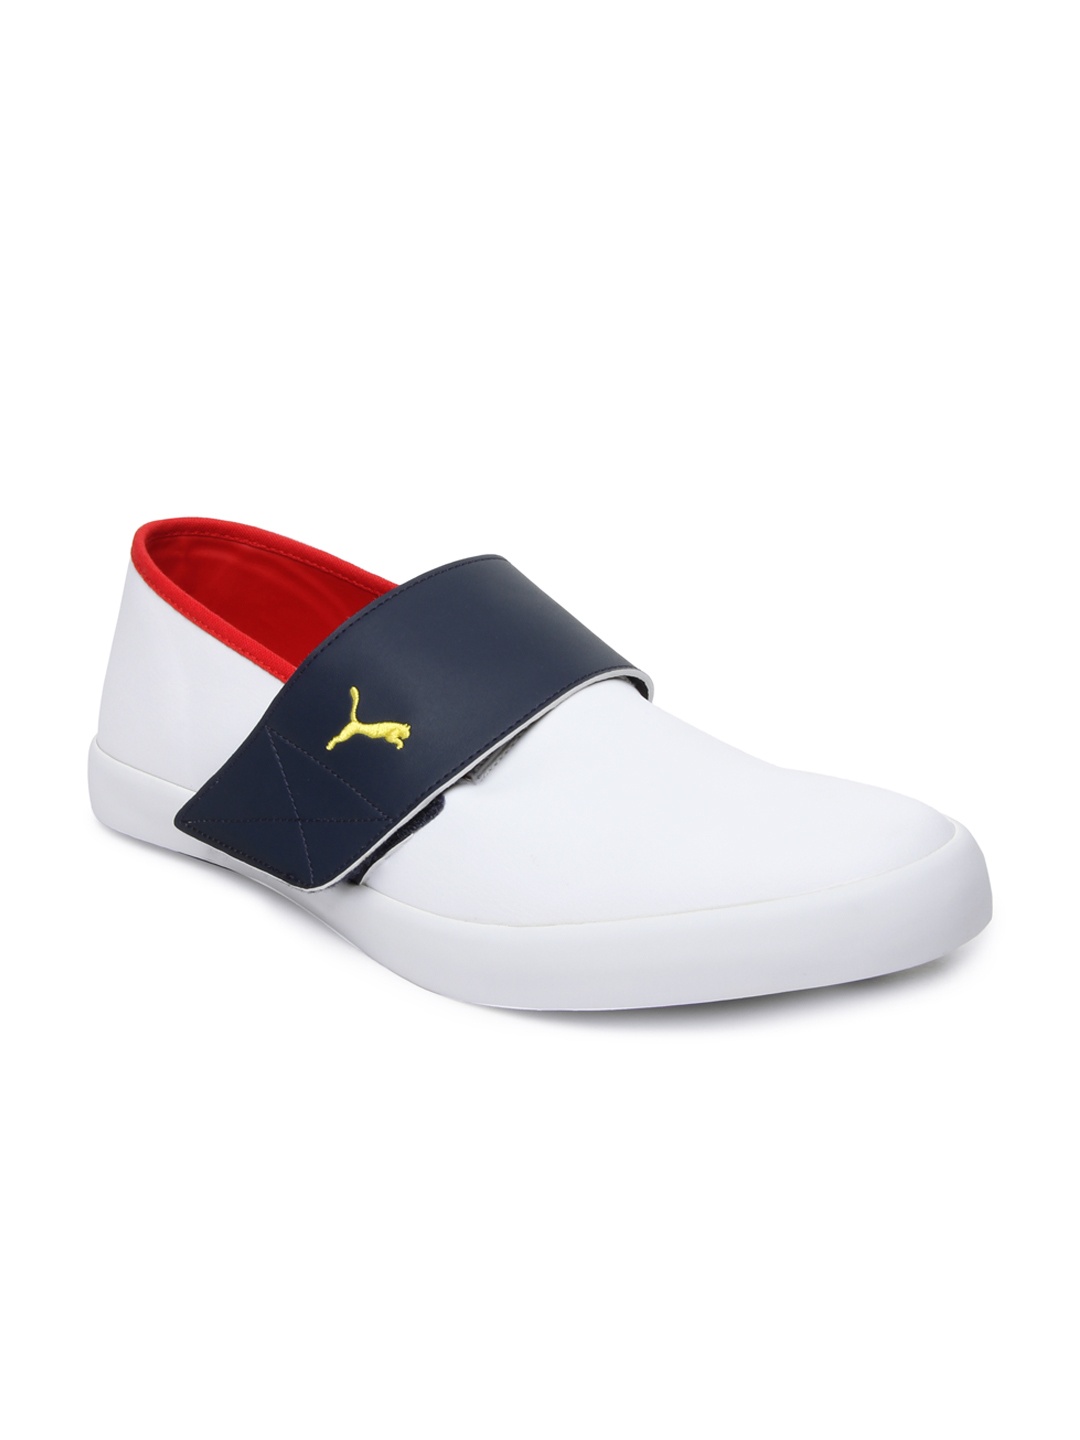 puma slip ons men shoes Sale,up to 30 